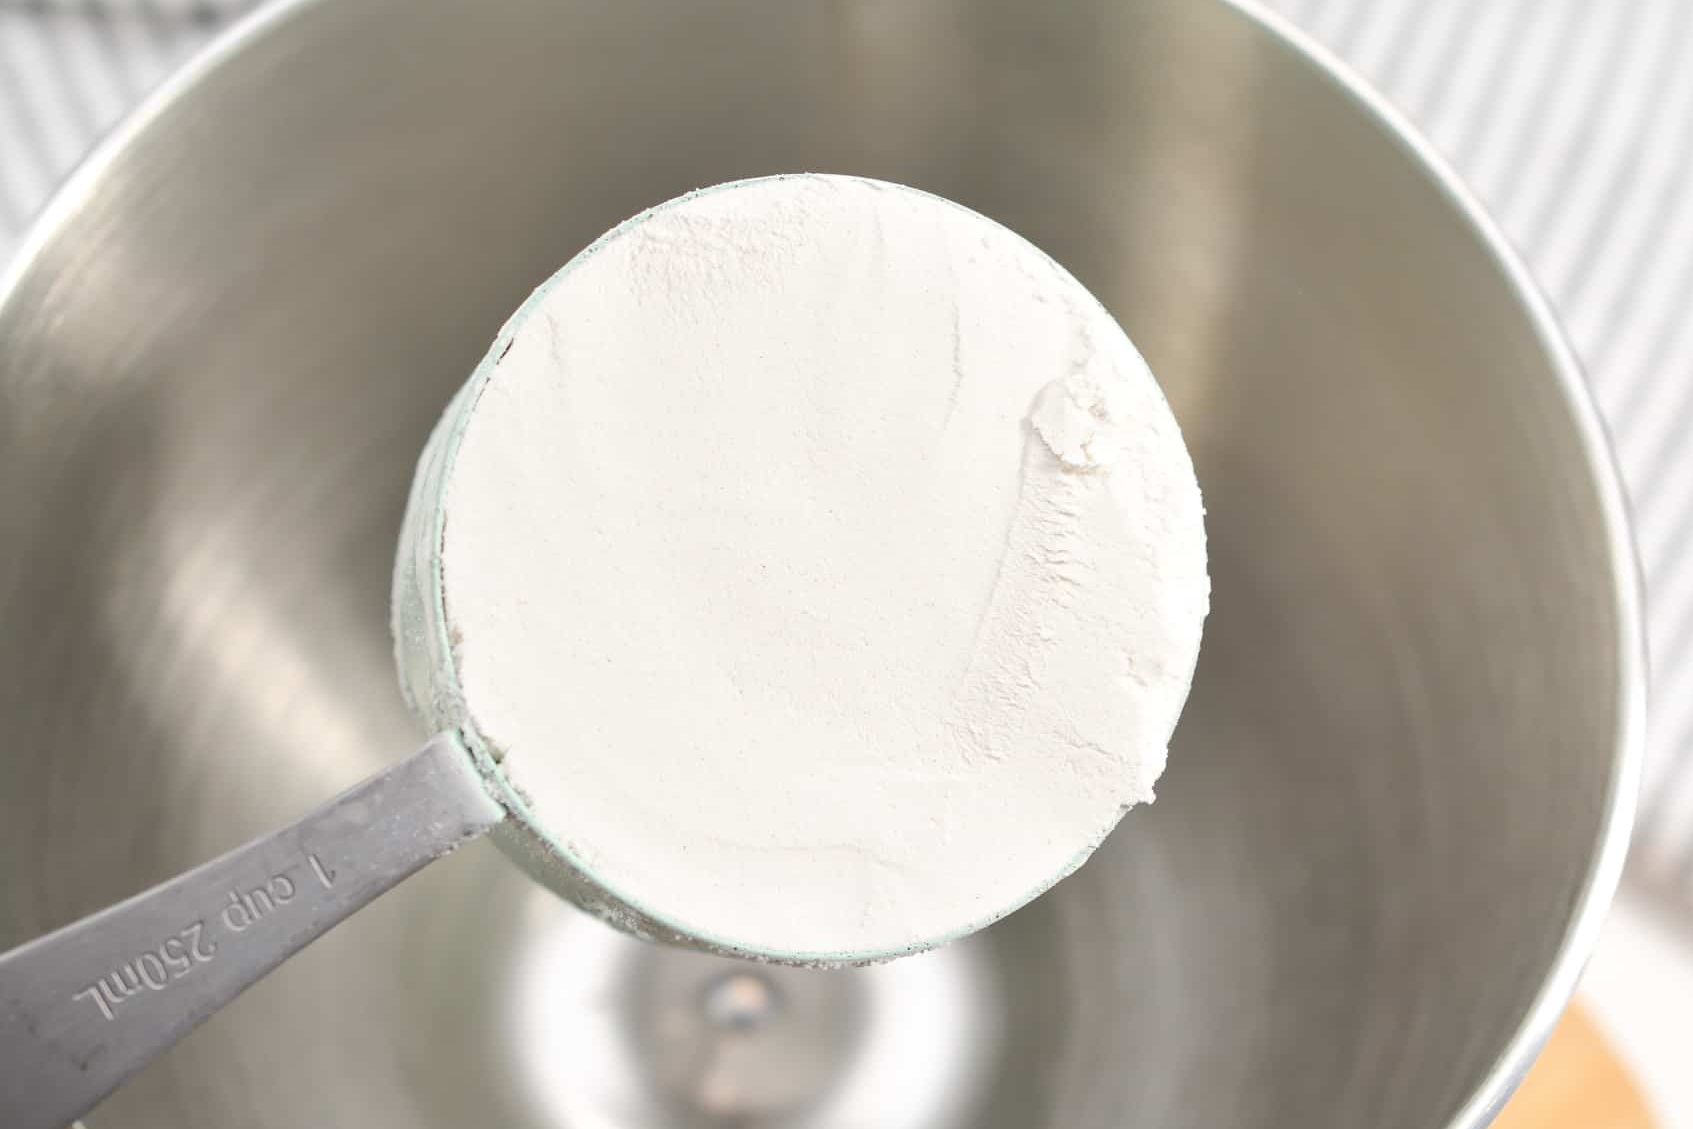 Add 2 ¼ cups of all-purpose flour.